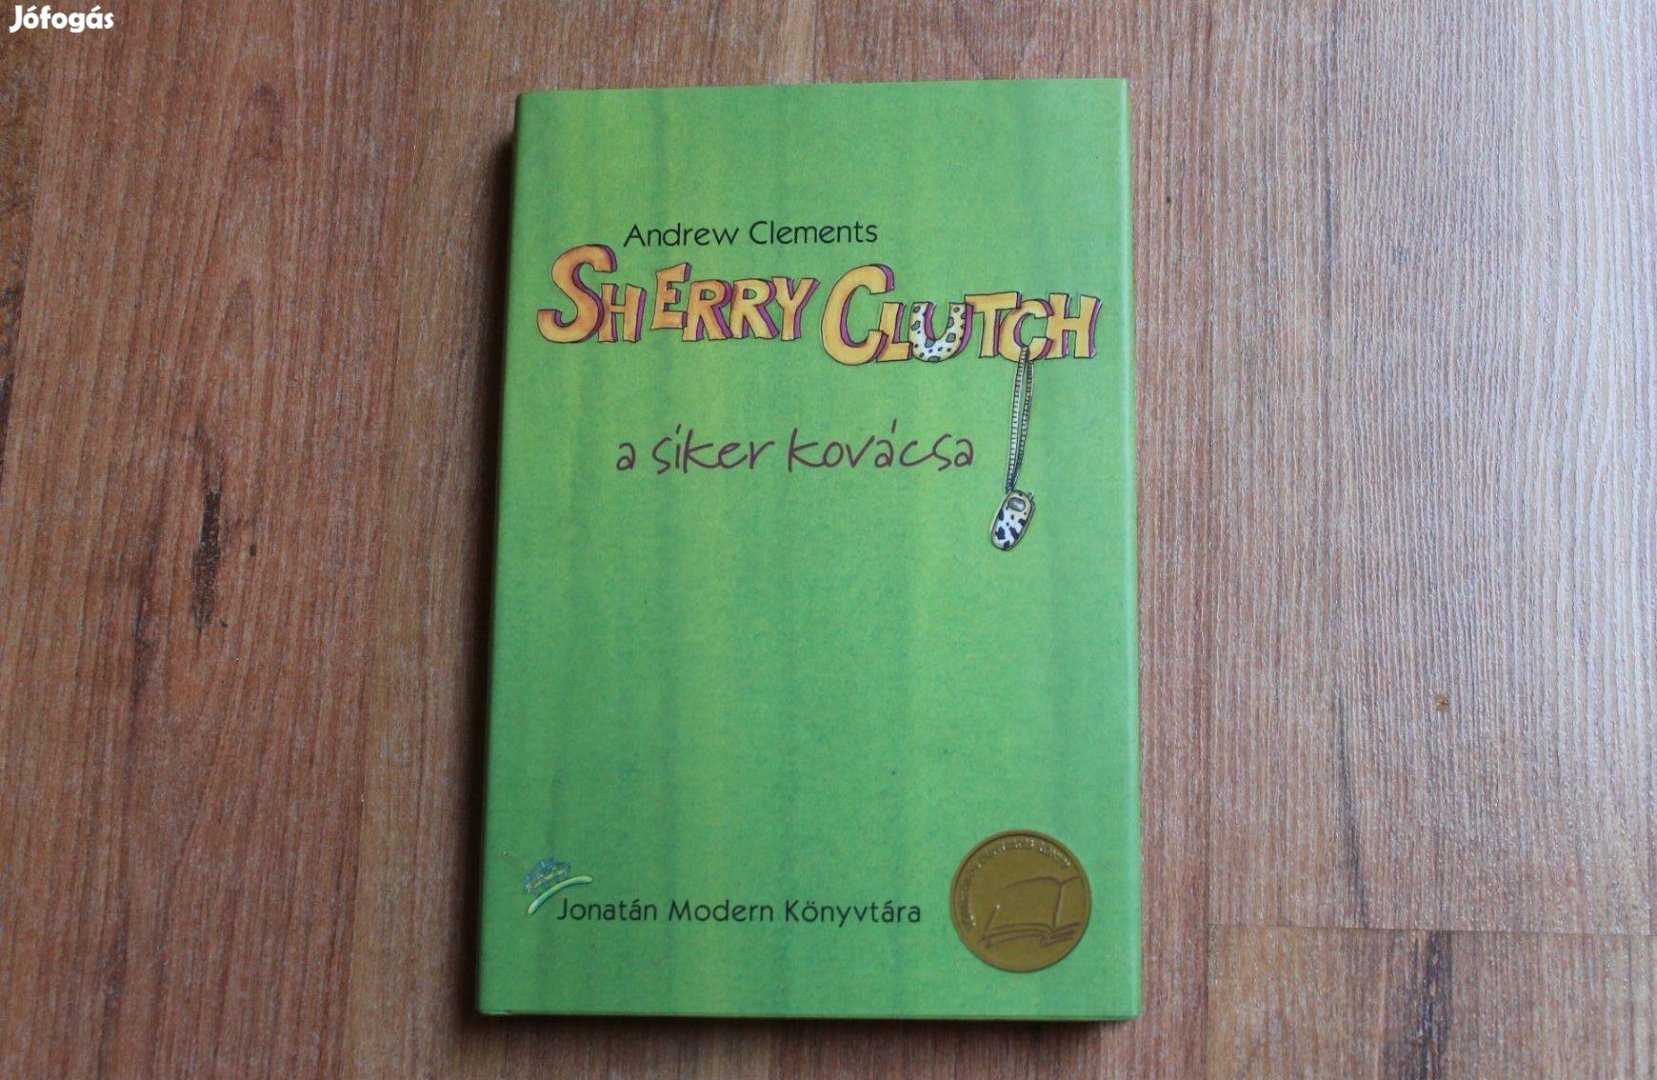 Andrew Clements - Sherry Clutch a siker kovácsa